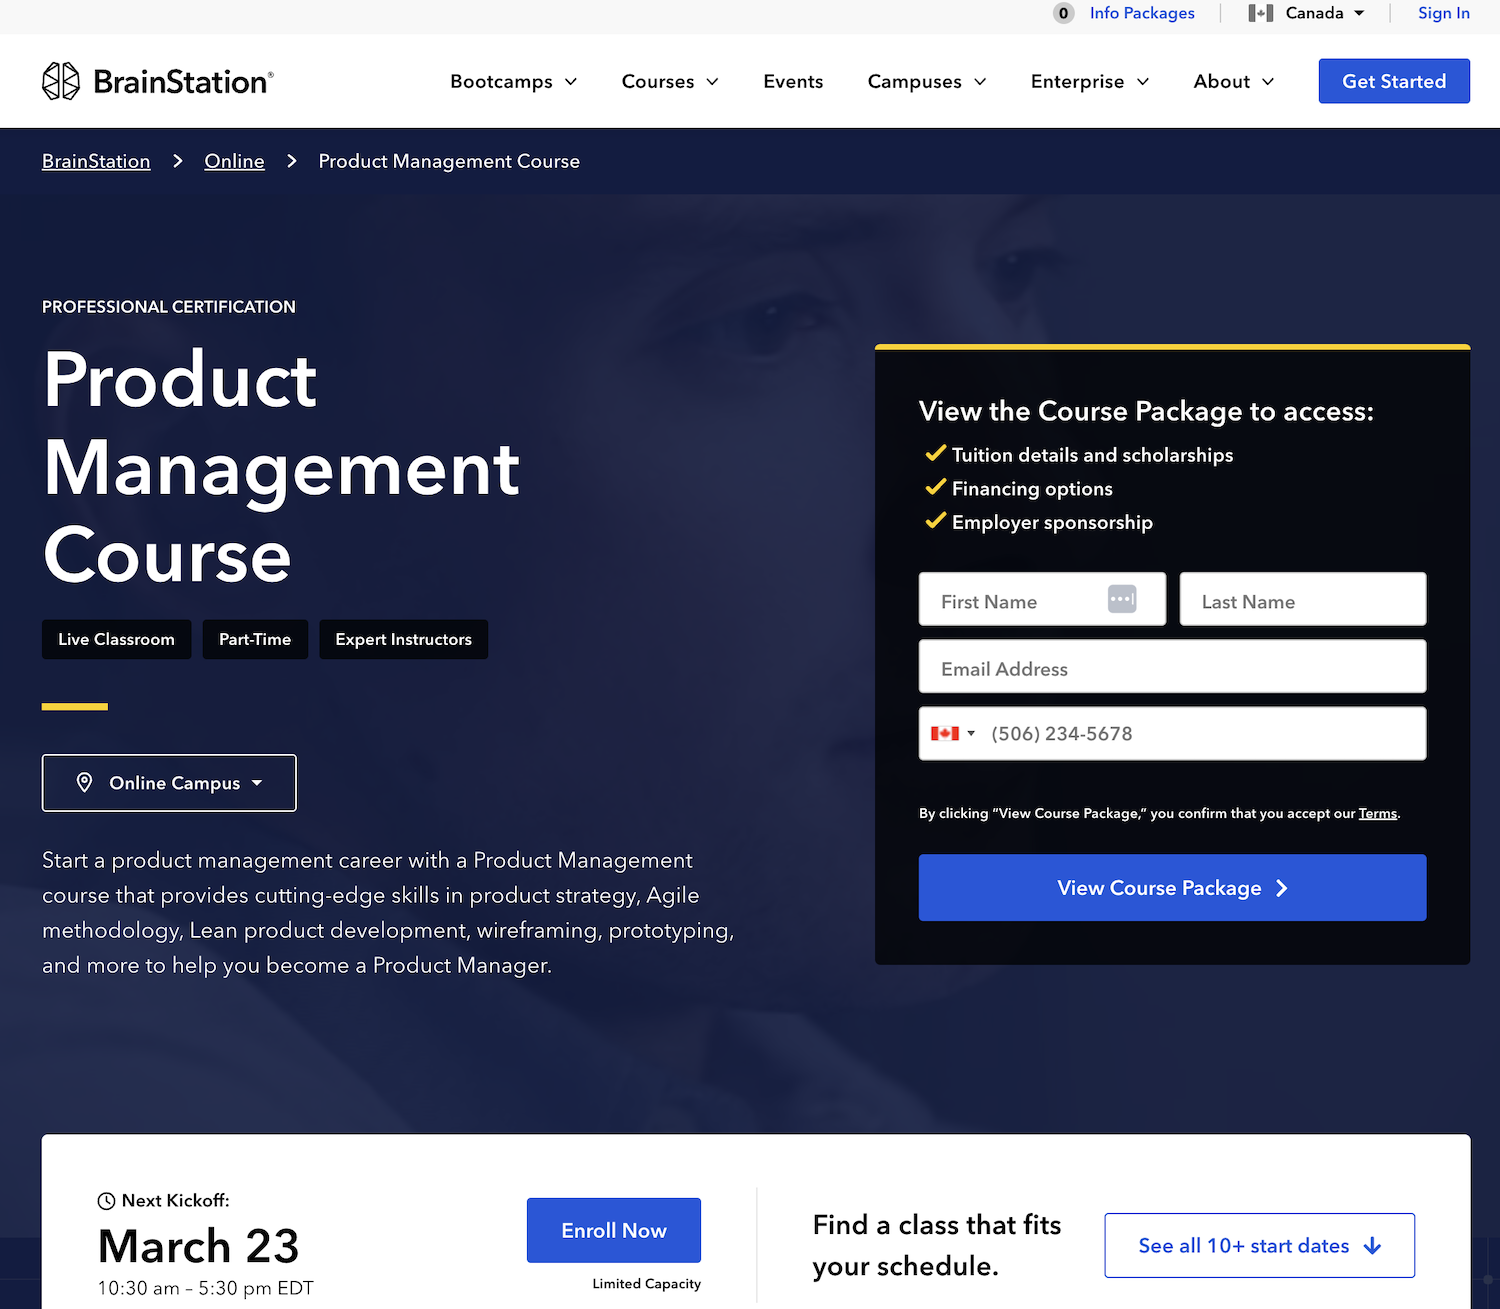 BrainStation offers an online product management course